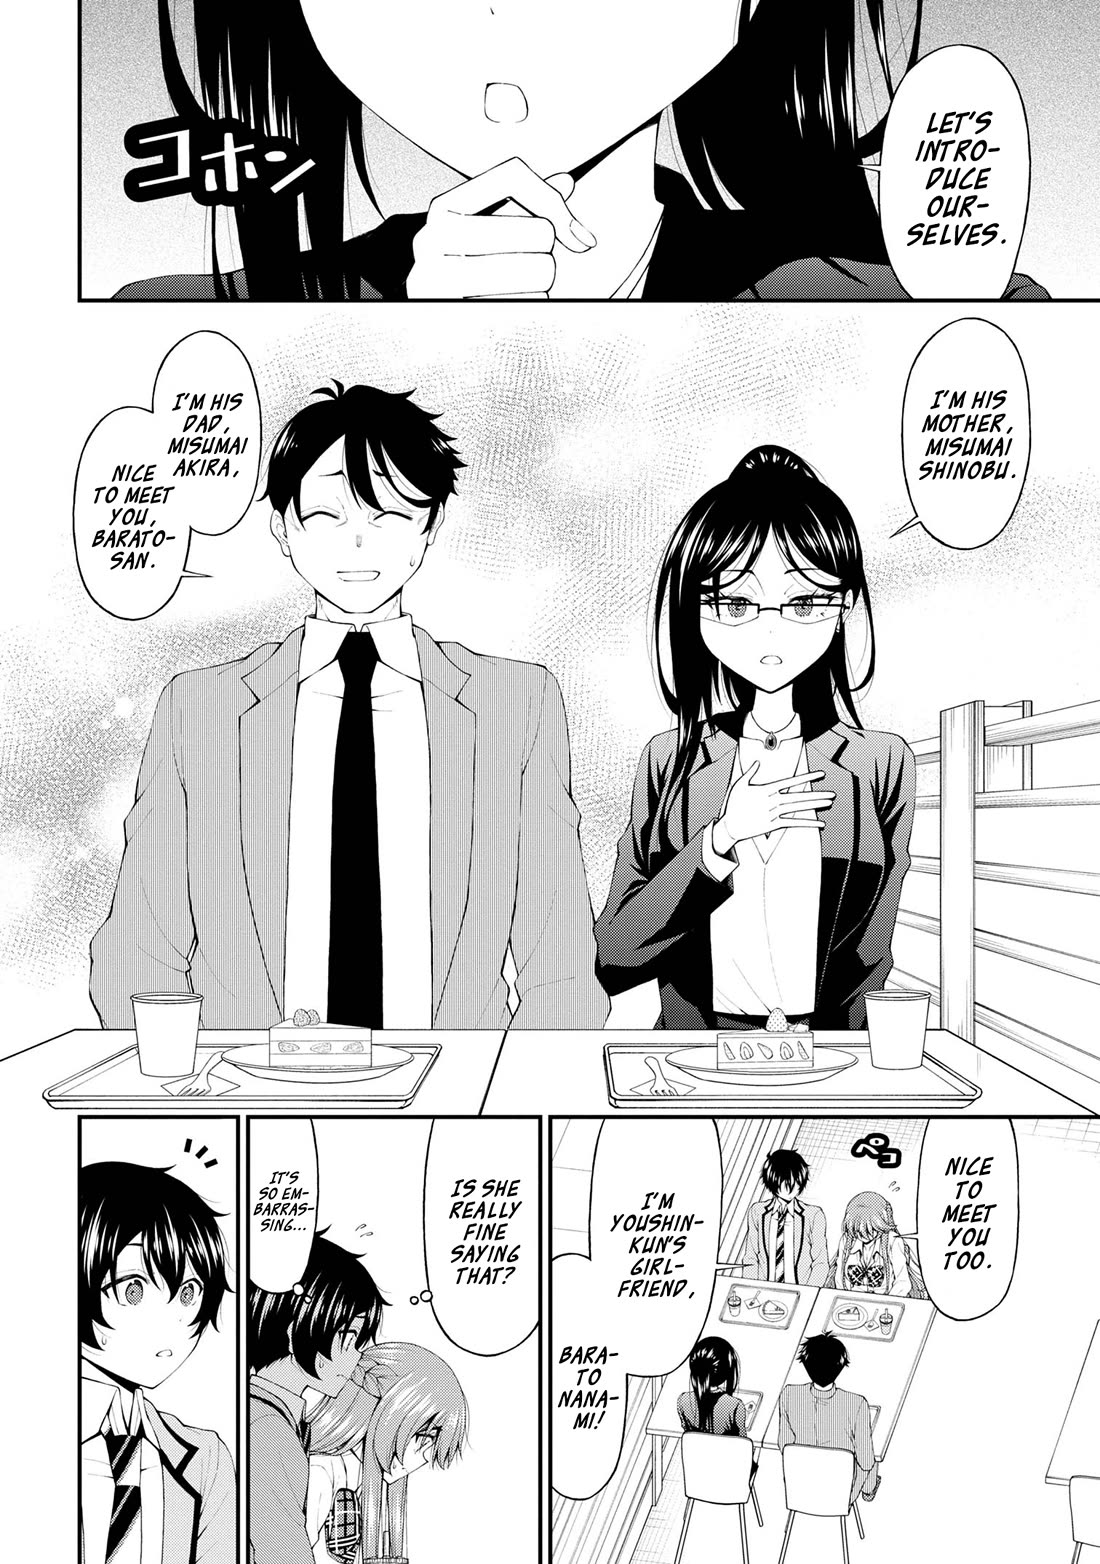 The Gal Who Was Meant to Confess to Me as a Game Punishment - chapter 15 - #2